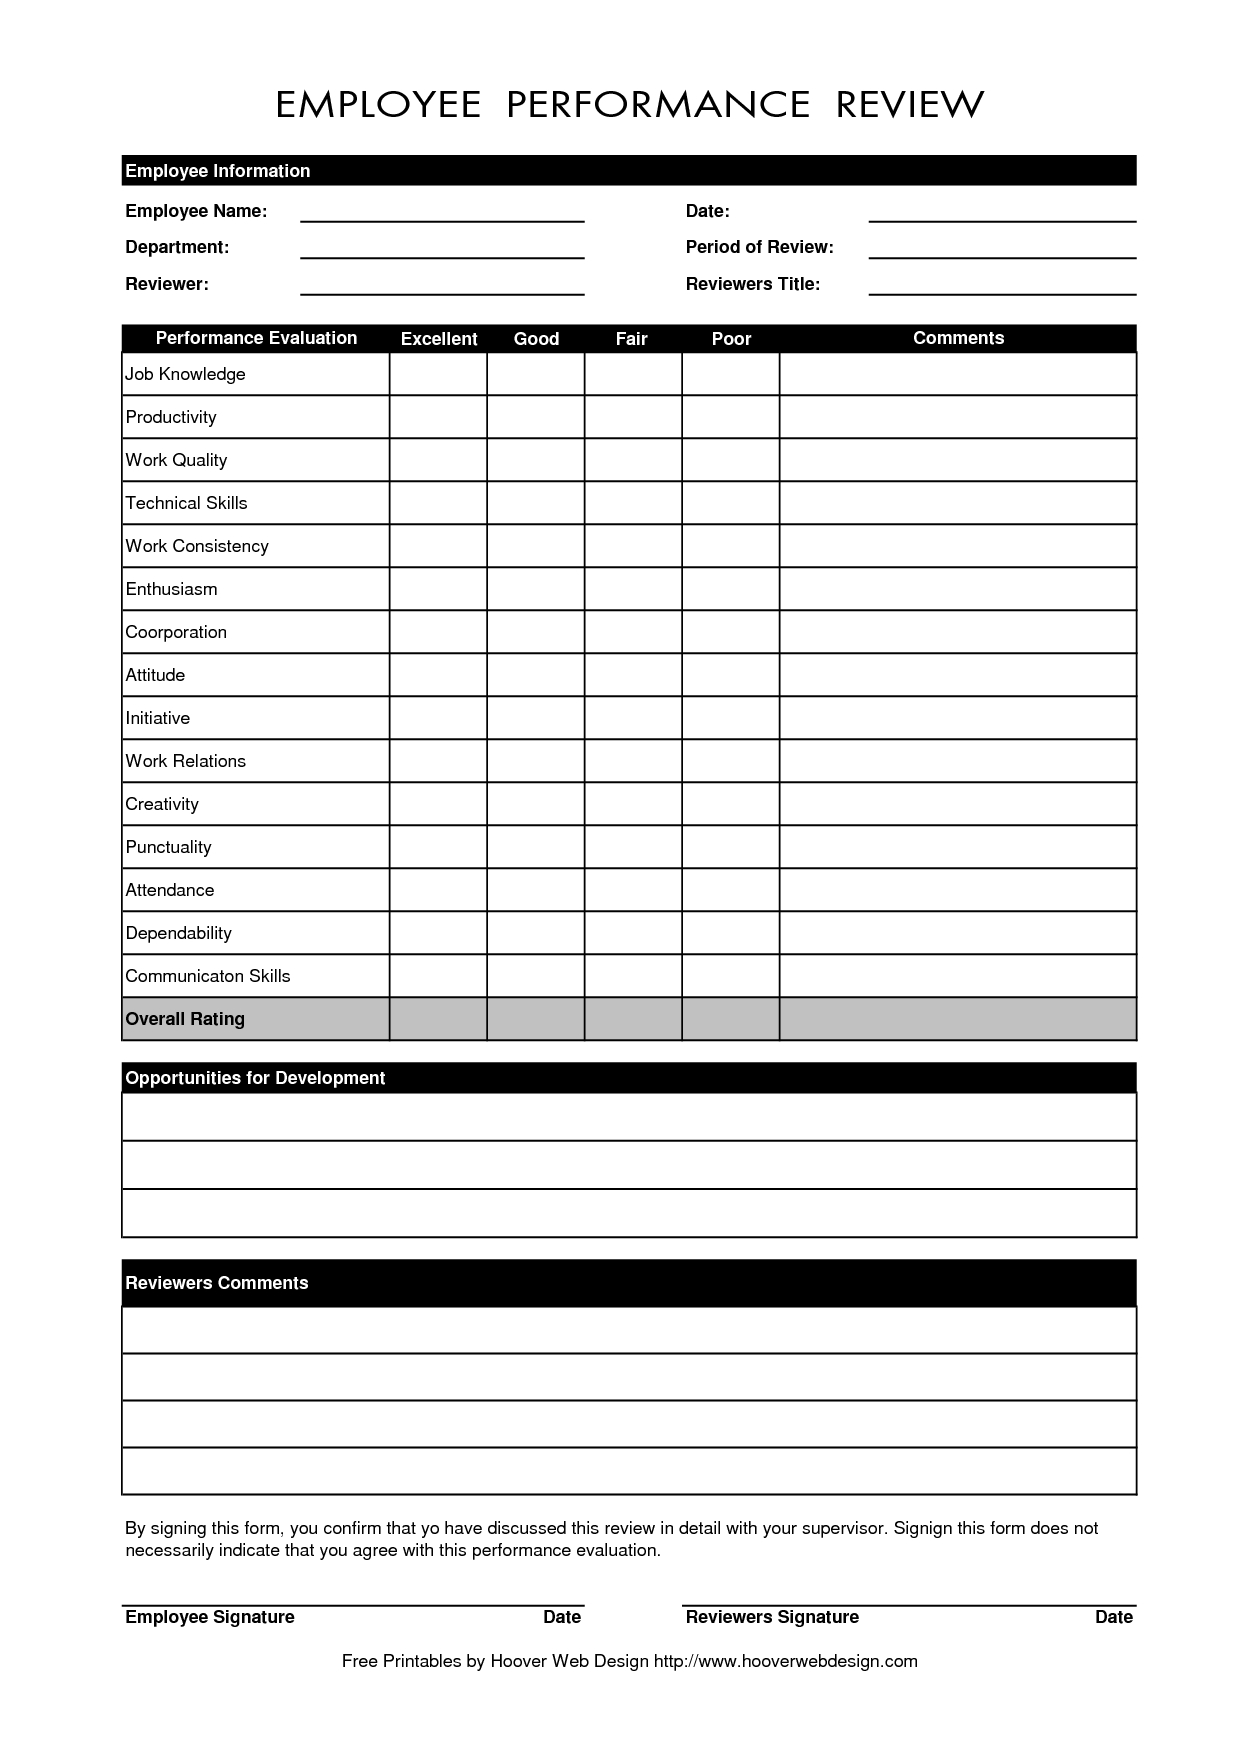 Free Employee Performance Review Forms | Excel | Pinterest - Free Employee Self Evaluation Forms Printable